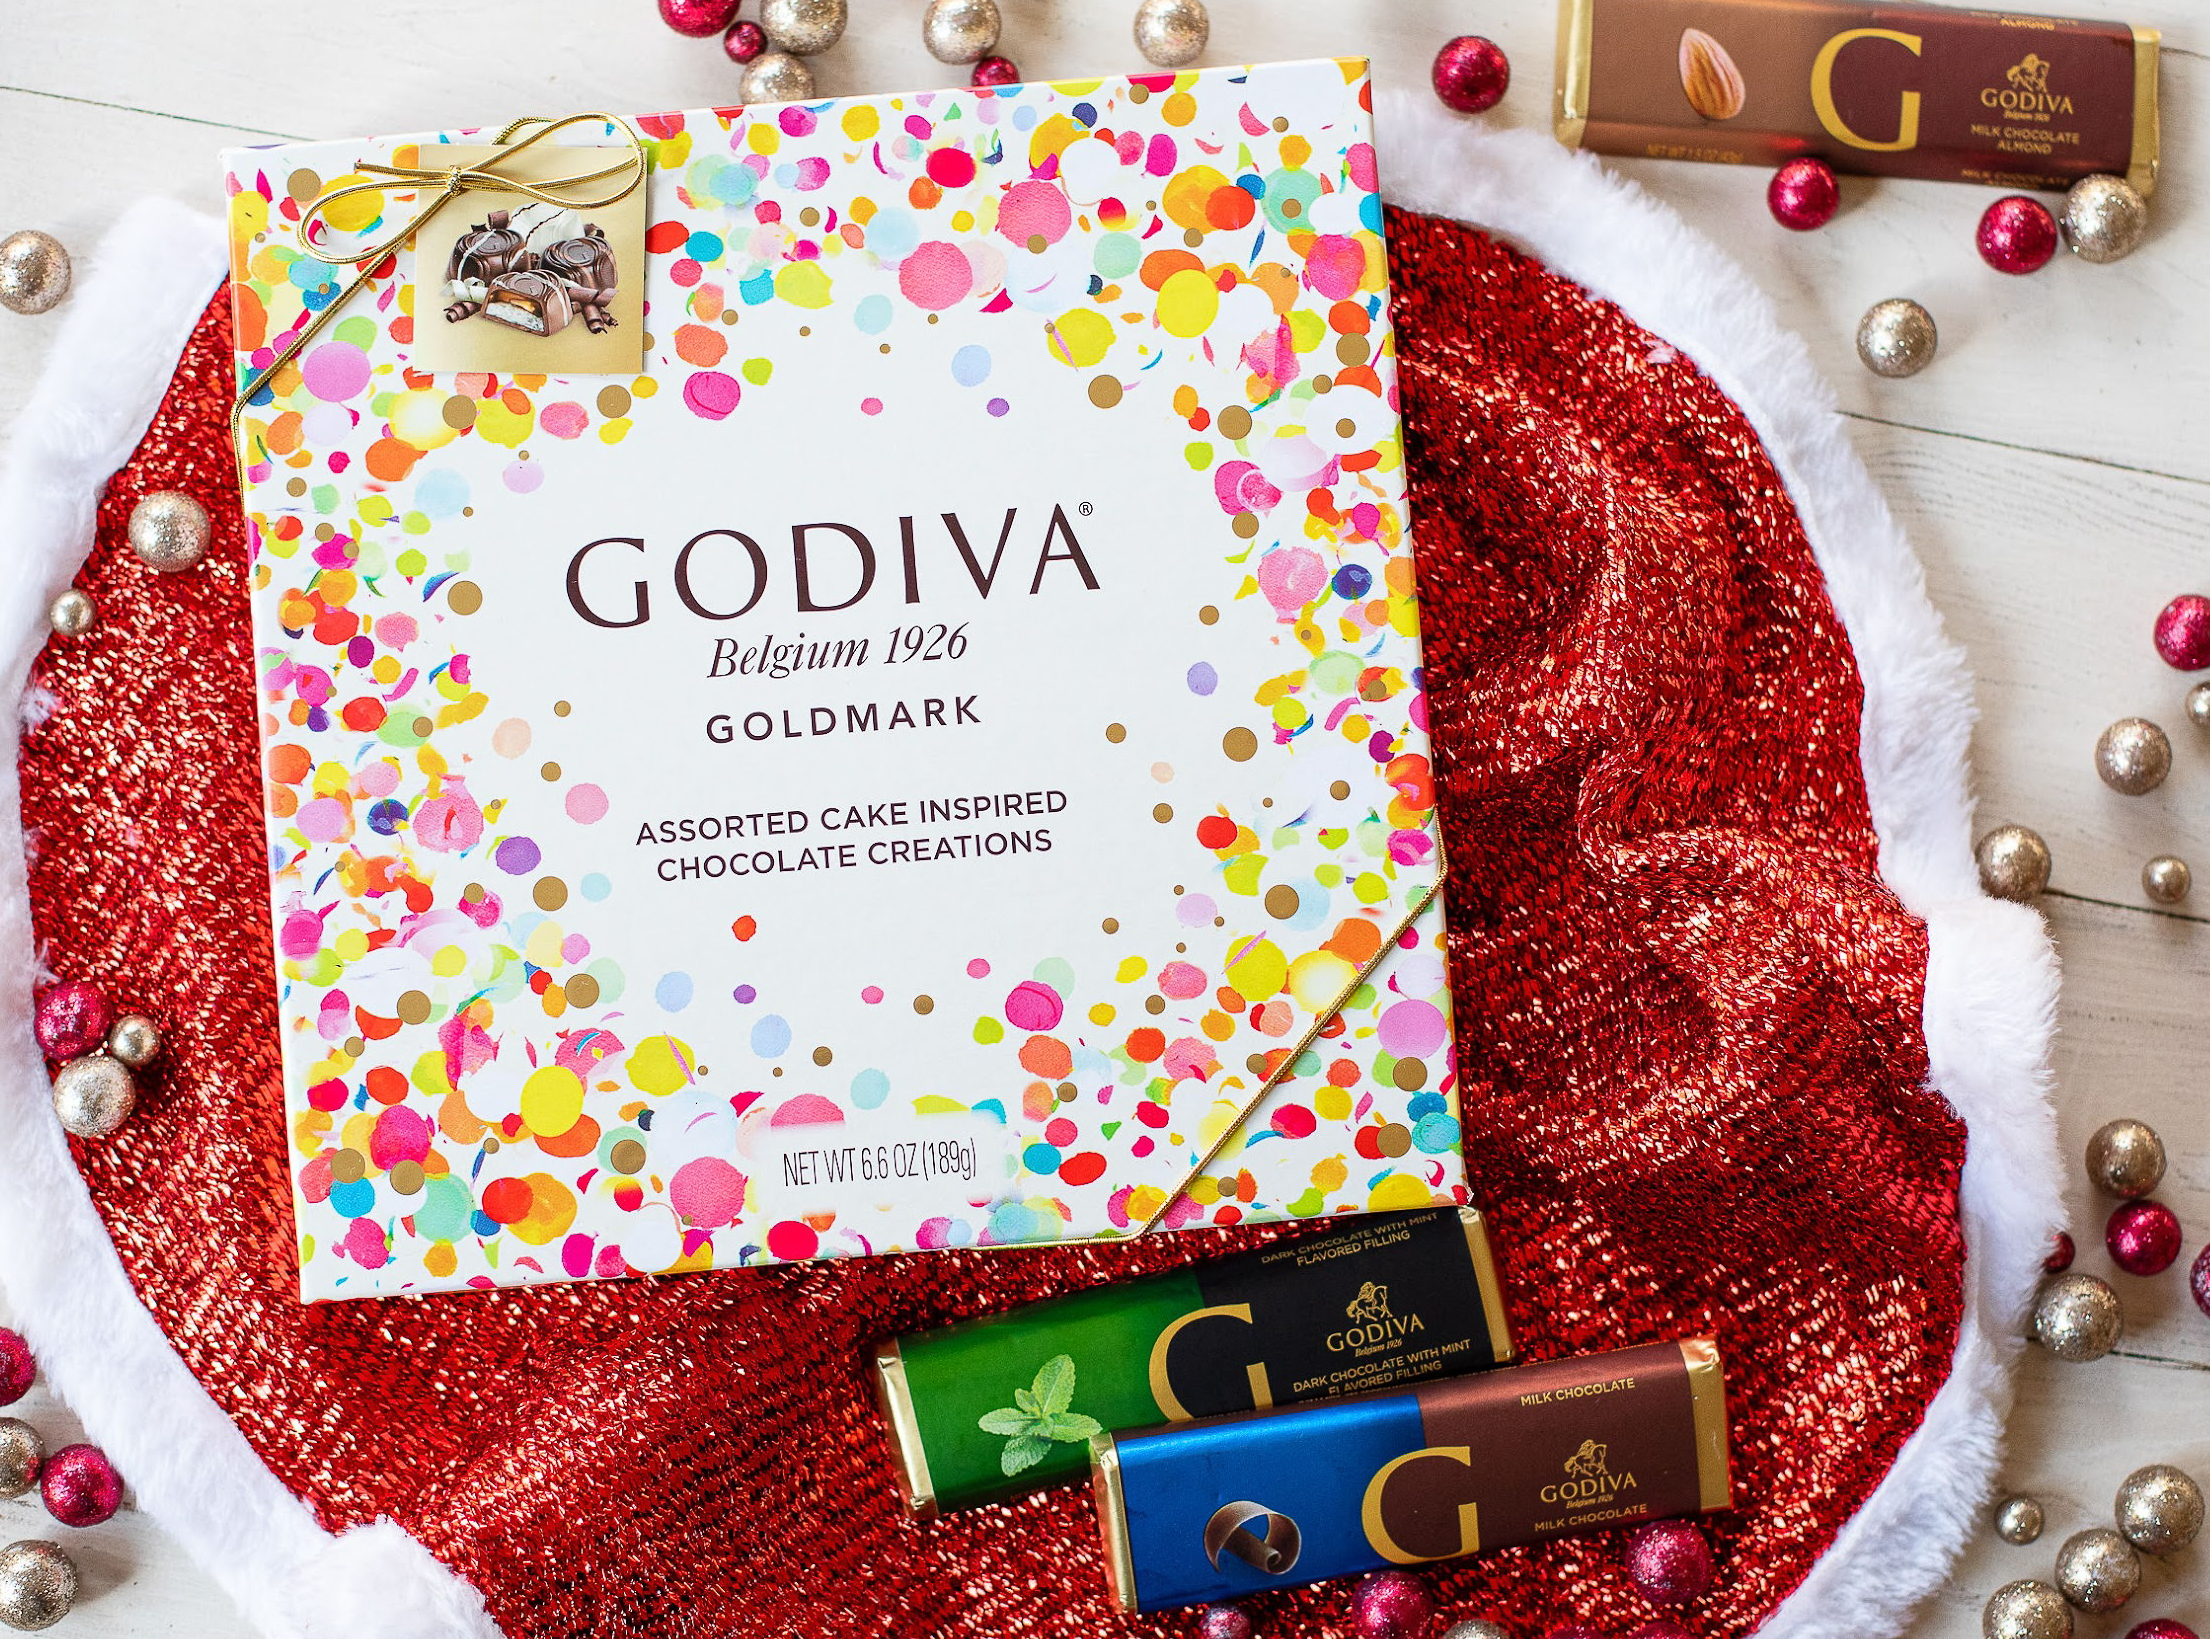 Enter For A Chance To Win Gift Cards or FREE GODIVA® In The The GODIVA Wonder-Full Giveaway on I Heart Publix